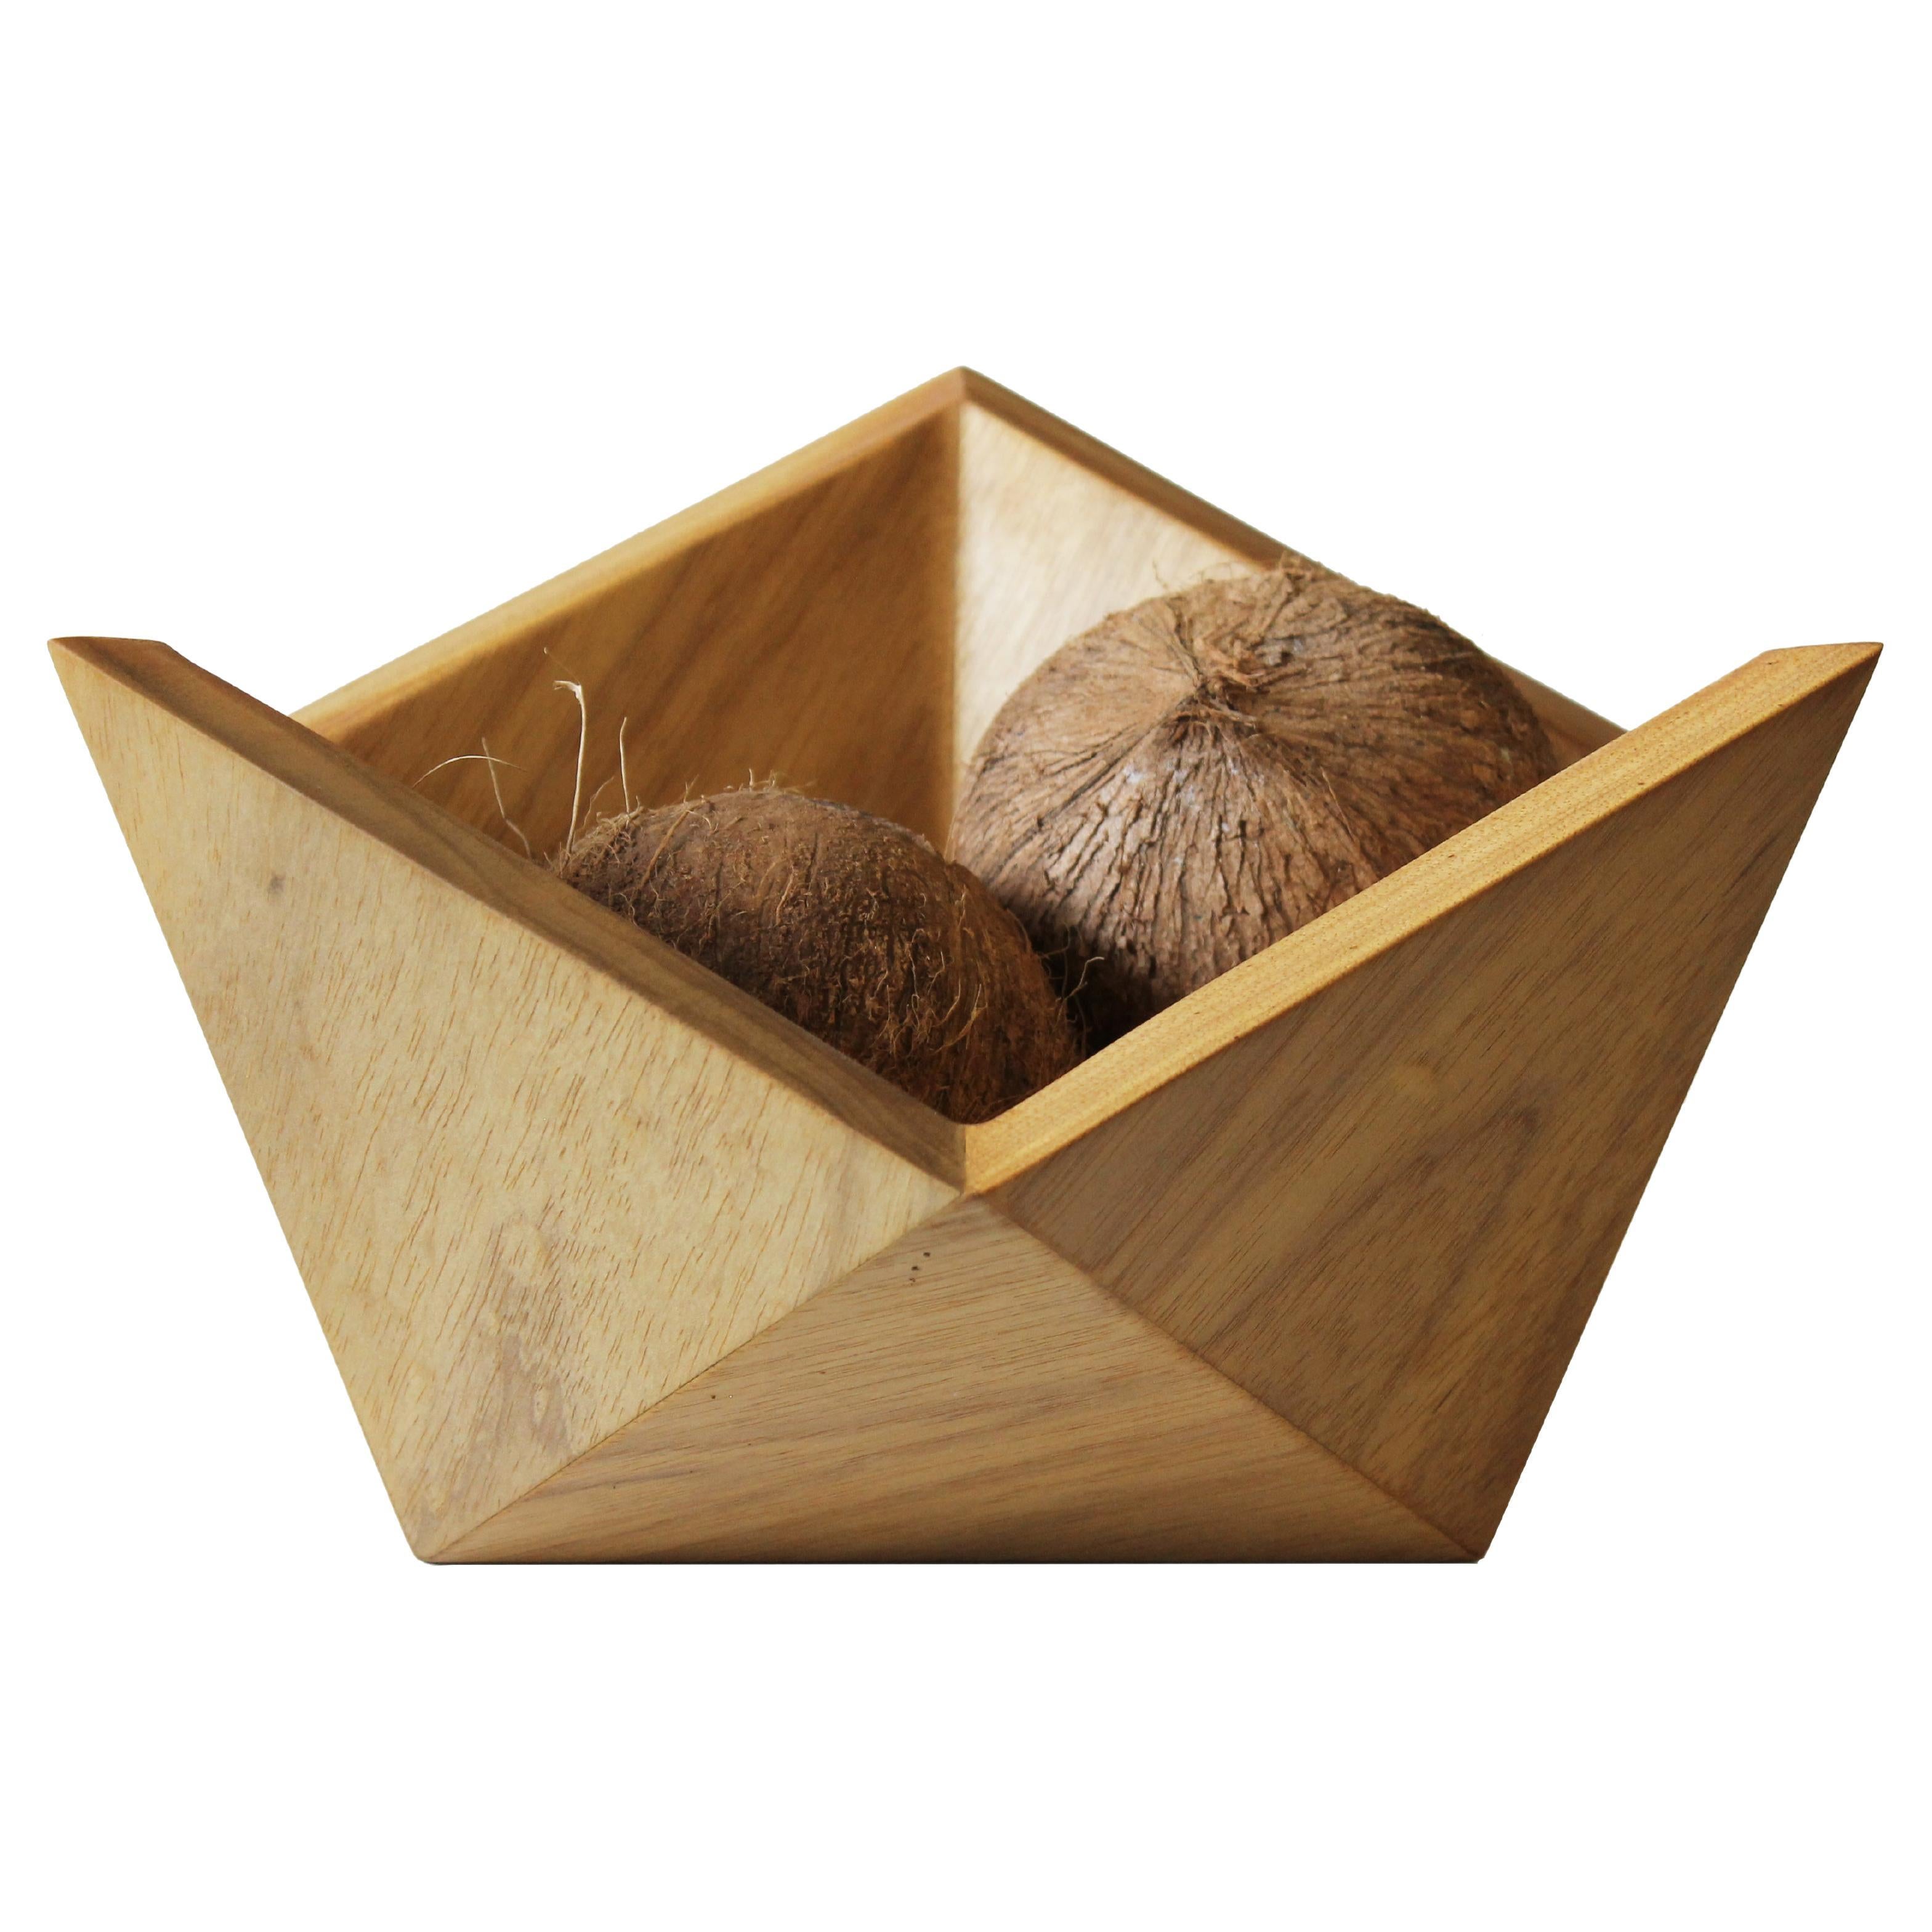 Its shape derives from the half of an icosahedron, resulting in a sculptural object with a good storage area. It is supported on the table by the center point or by the sides, in a dynamic position. Due to the shape, it is also possible to make